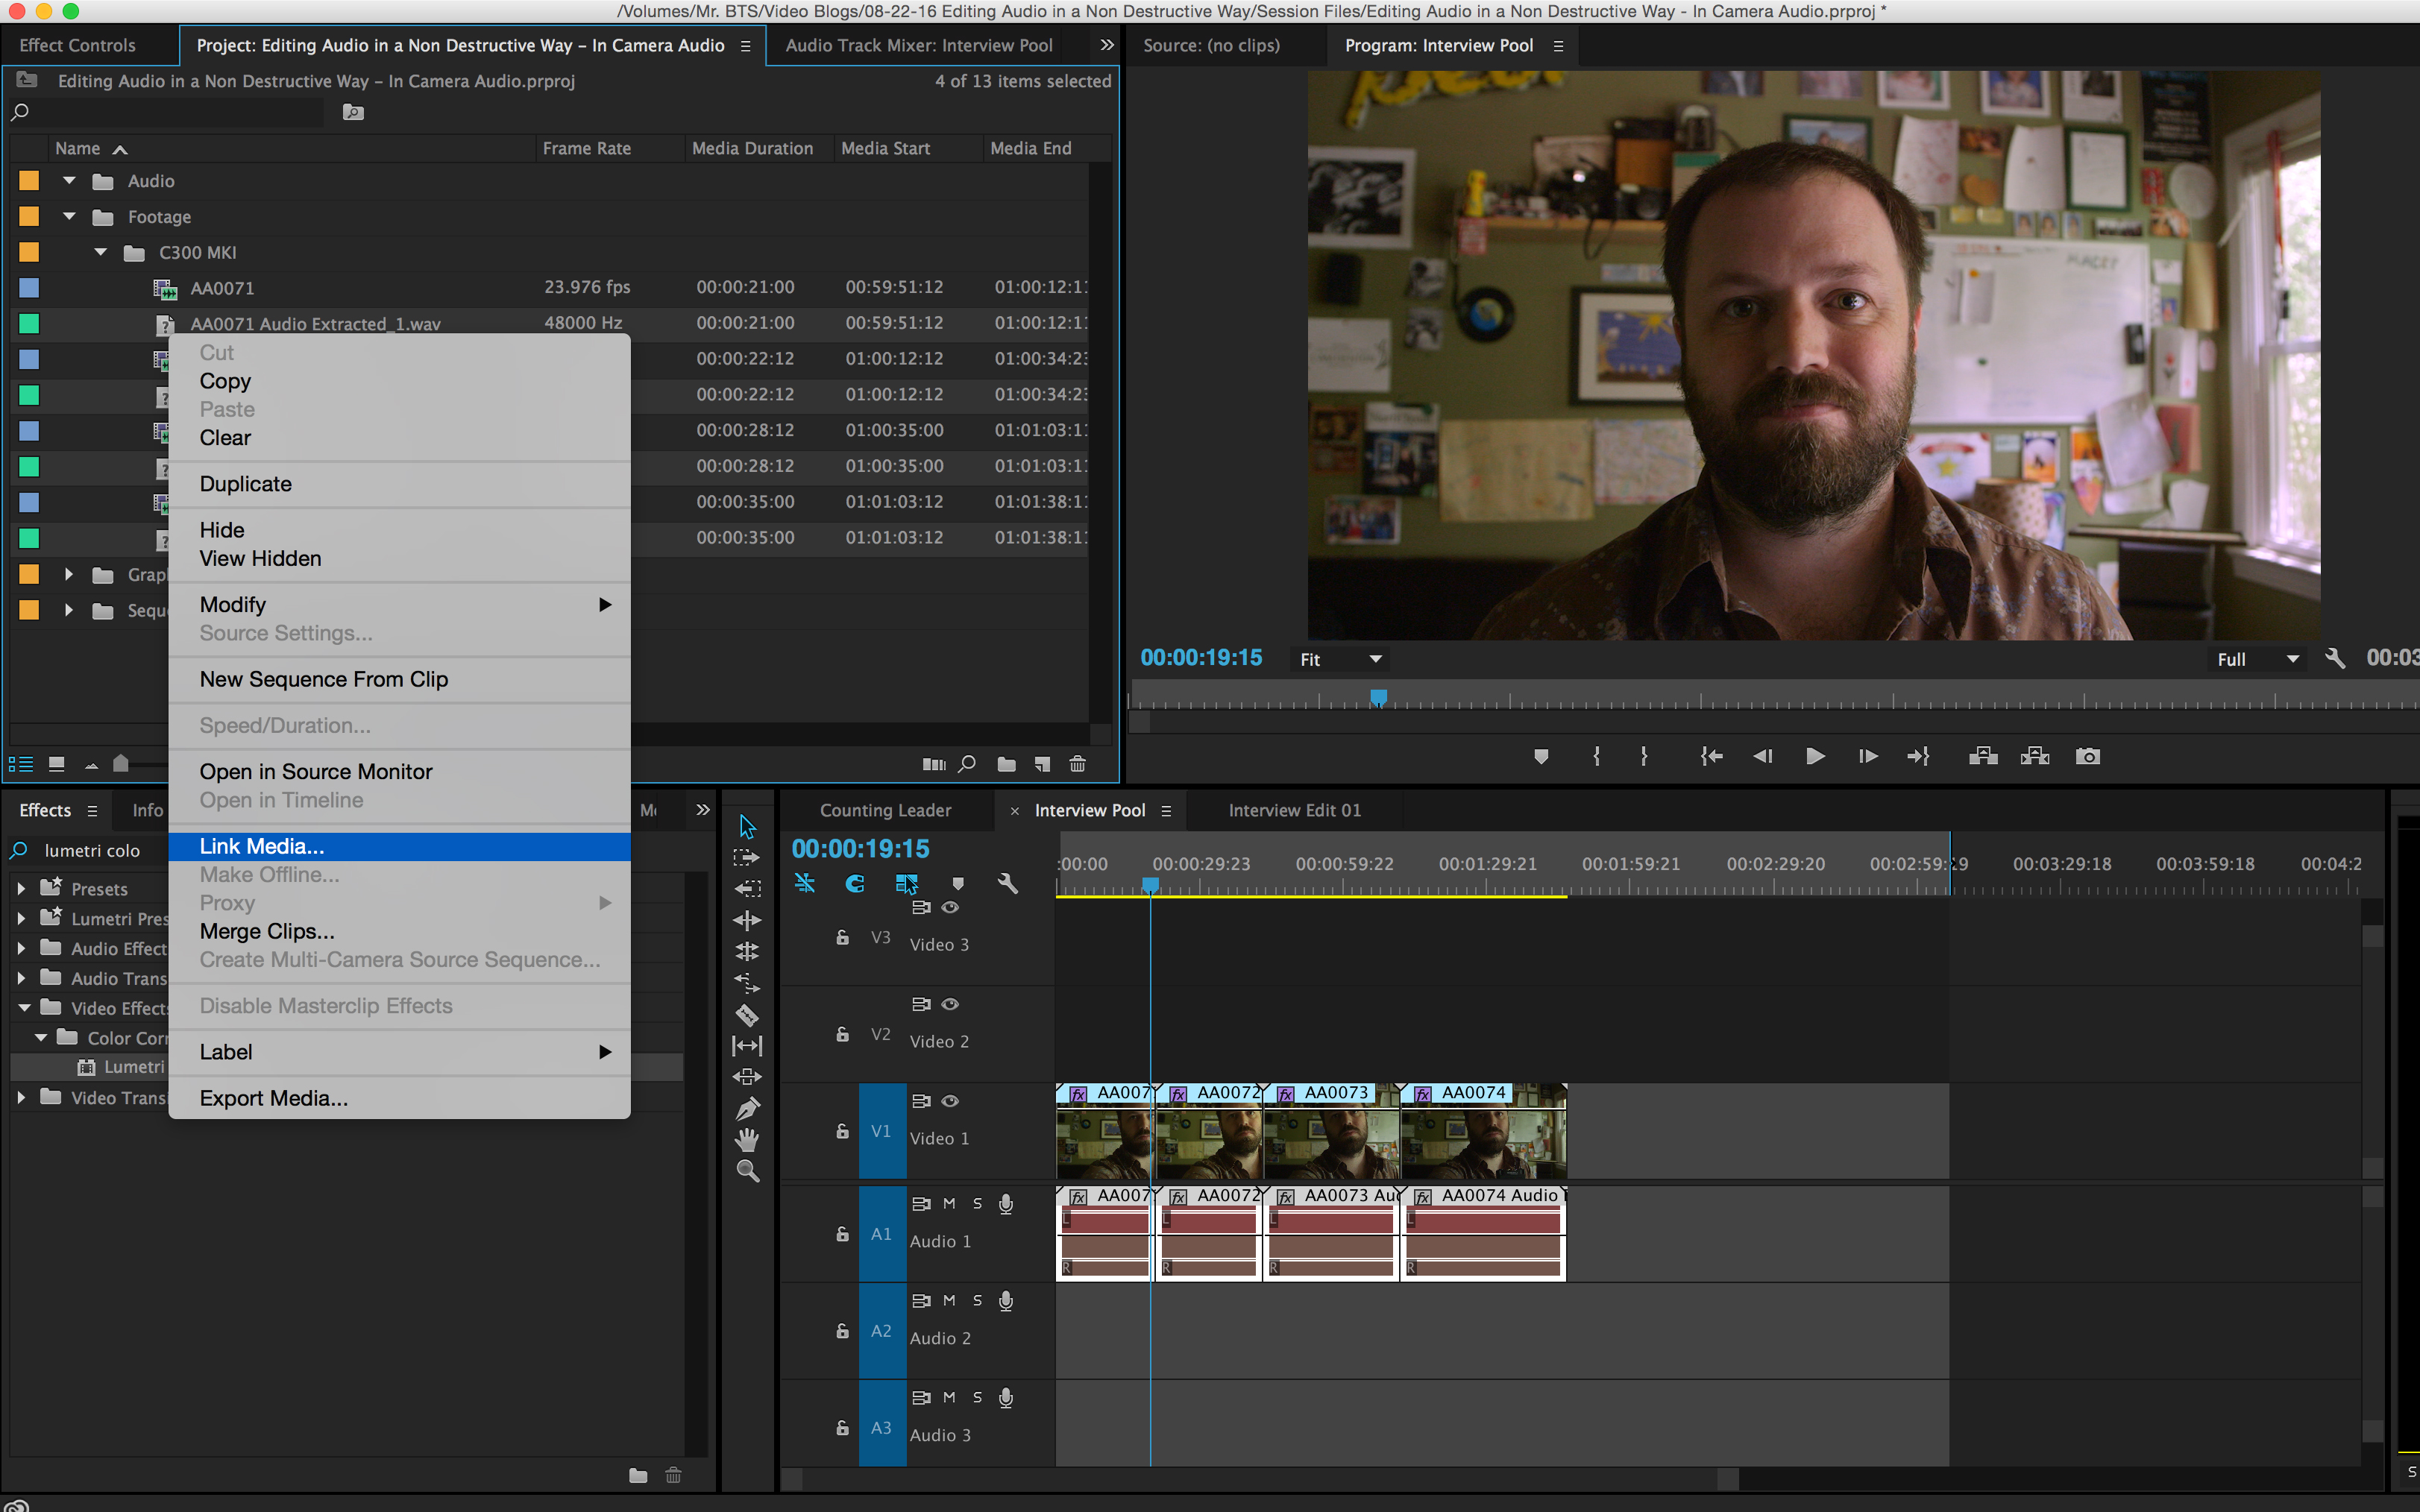 How to Simultaneously Edit Multiple Internal Camera Audio Files: Link Media Adobe Premiere CC